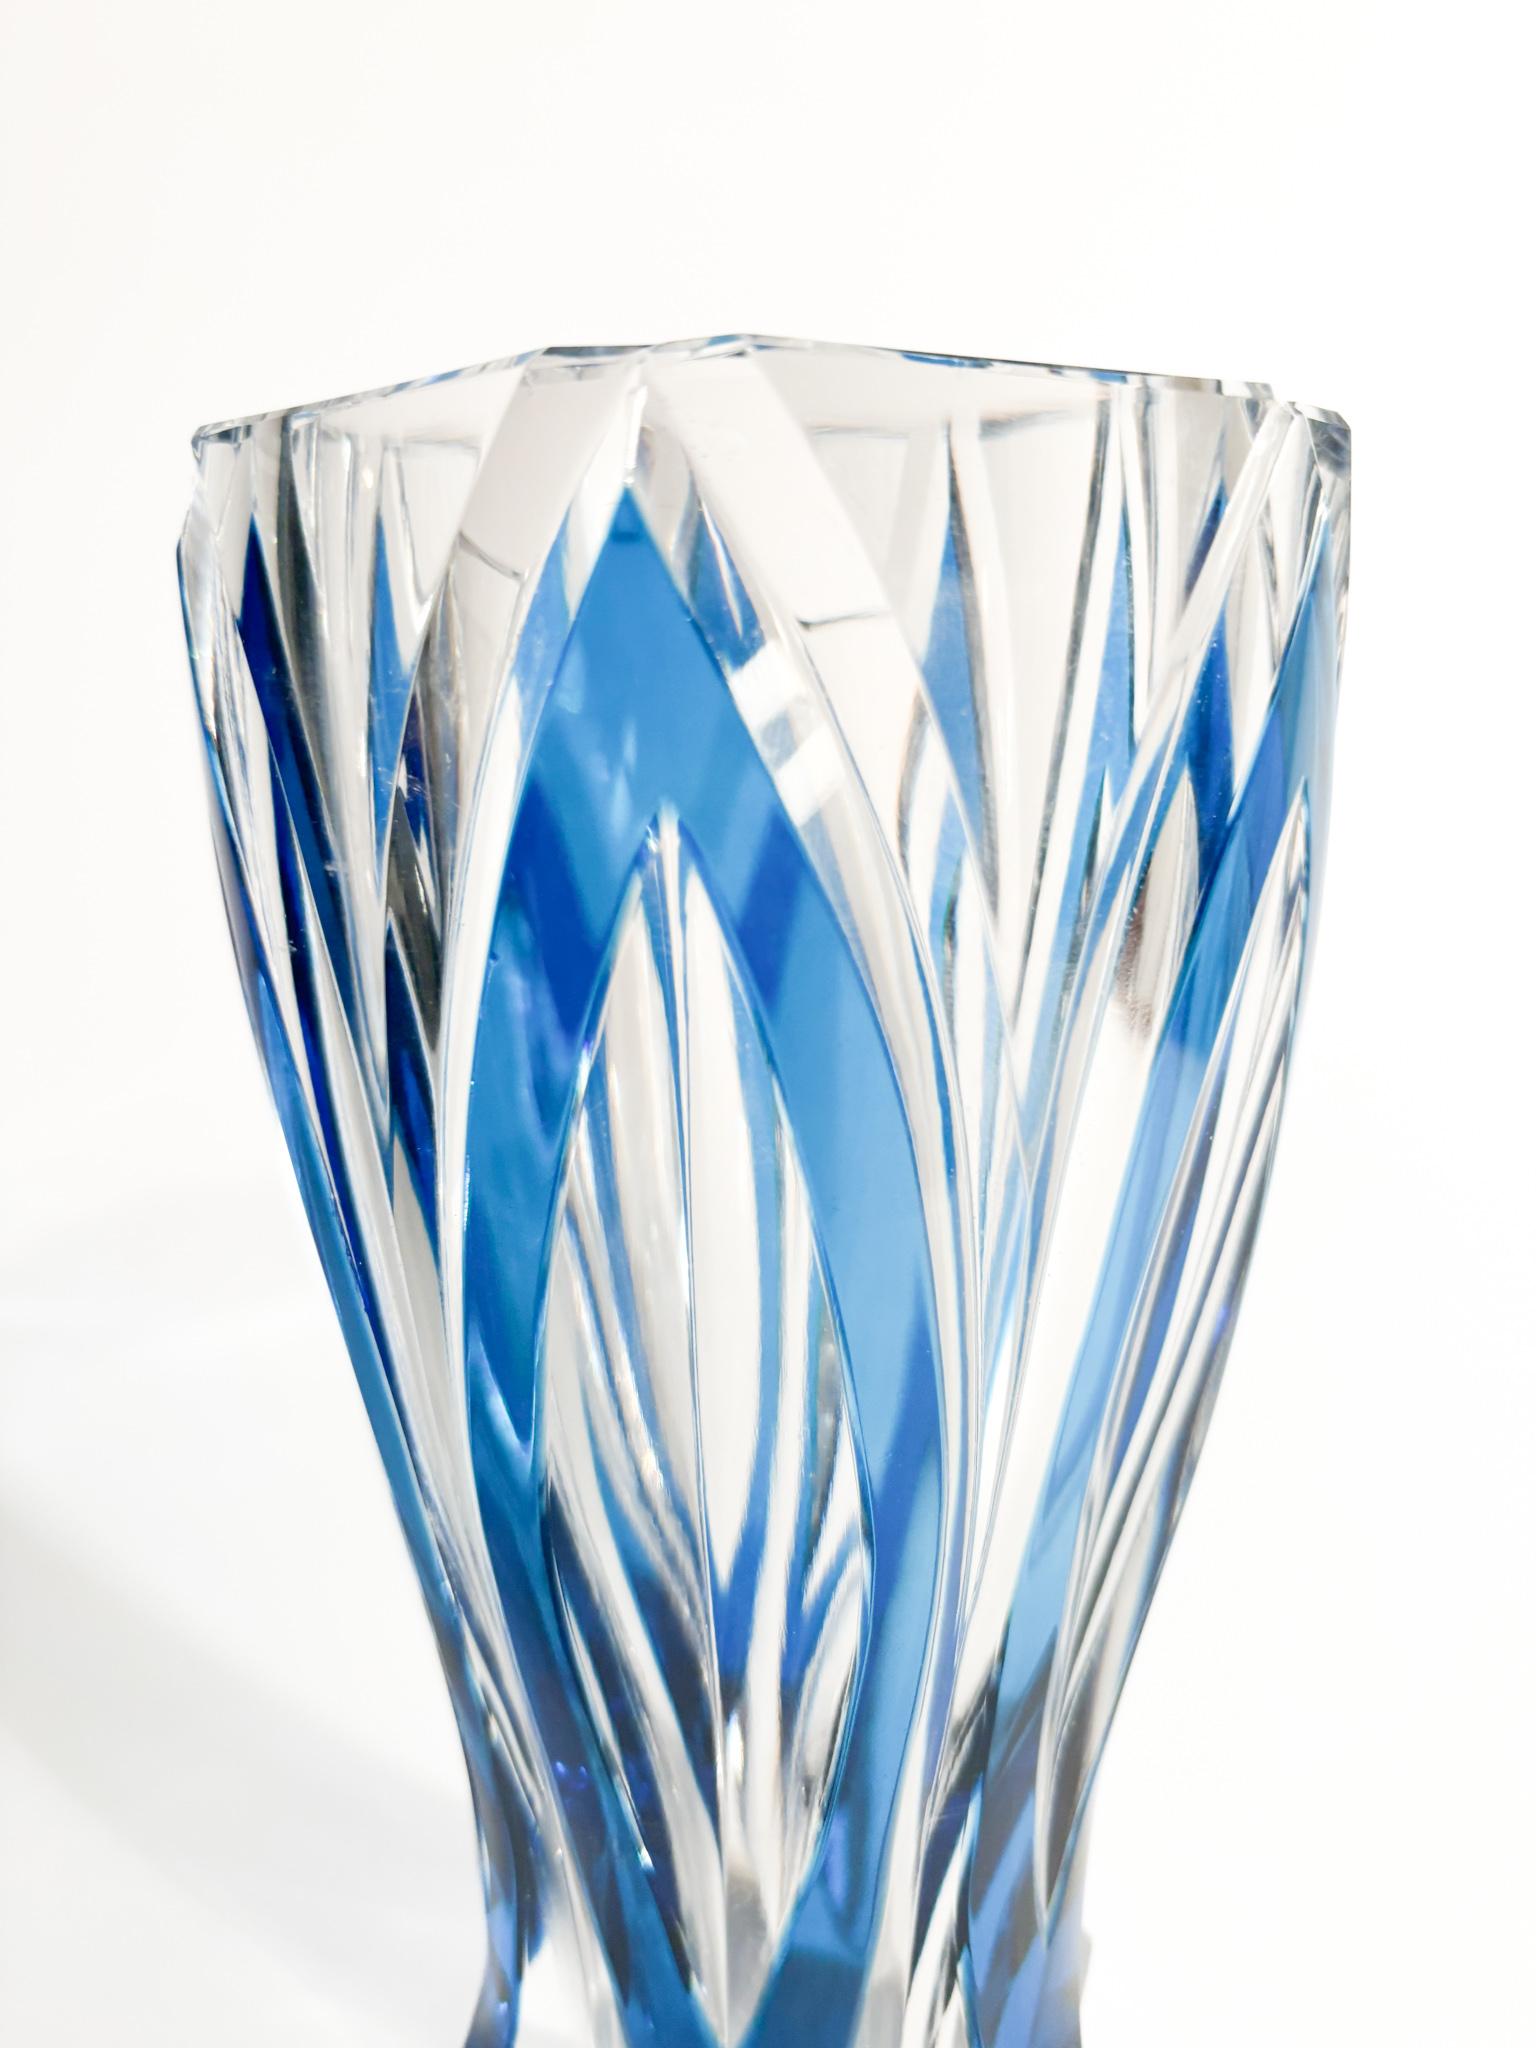 Mid-20th Century Saint-Louis Blue French Crystal Vase from the 1940s For Sale